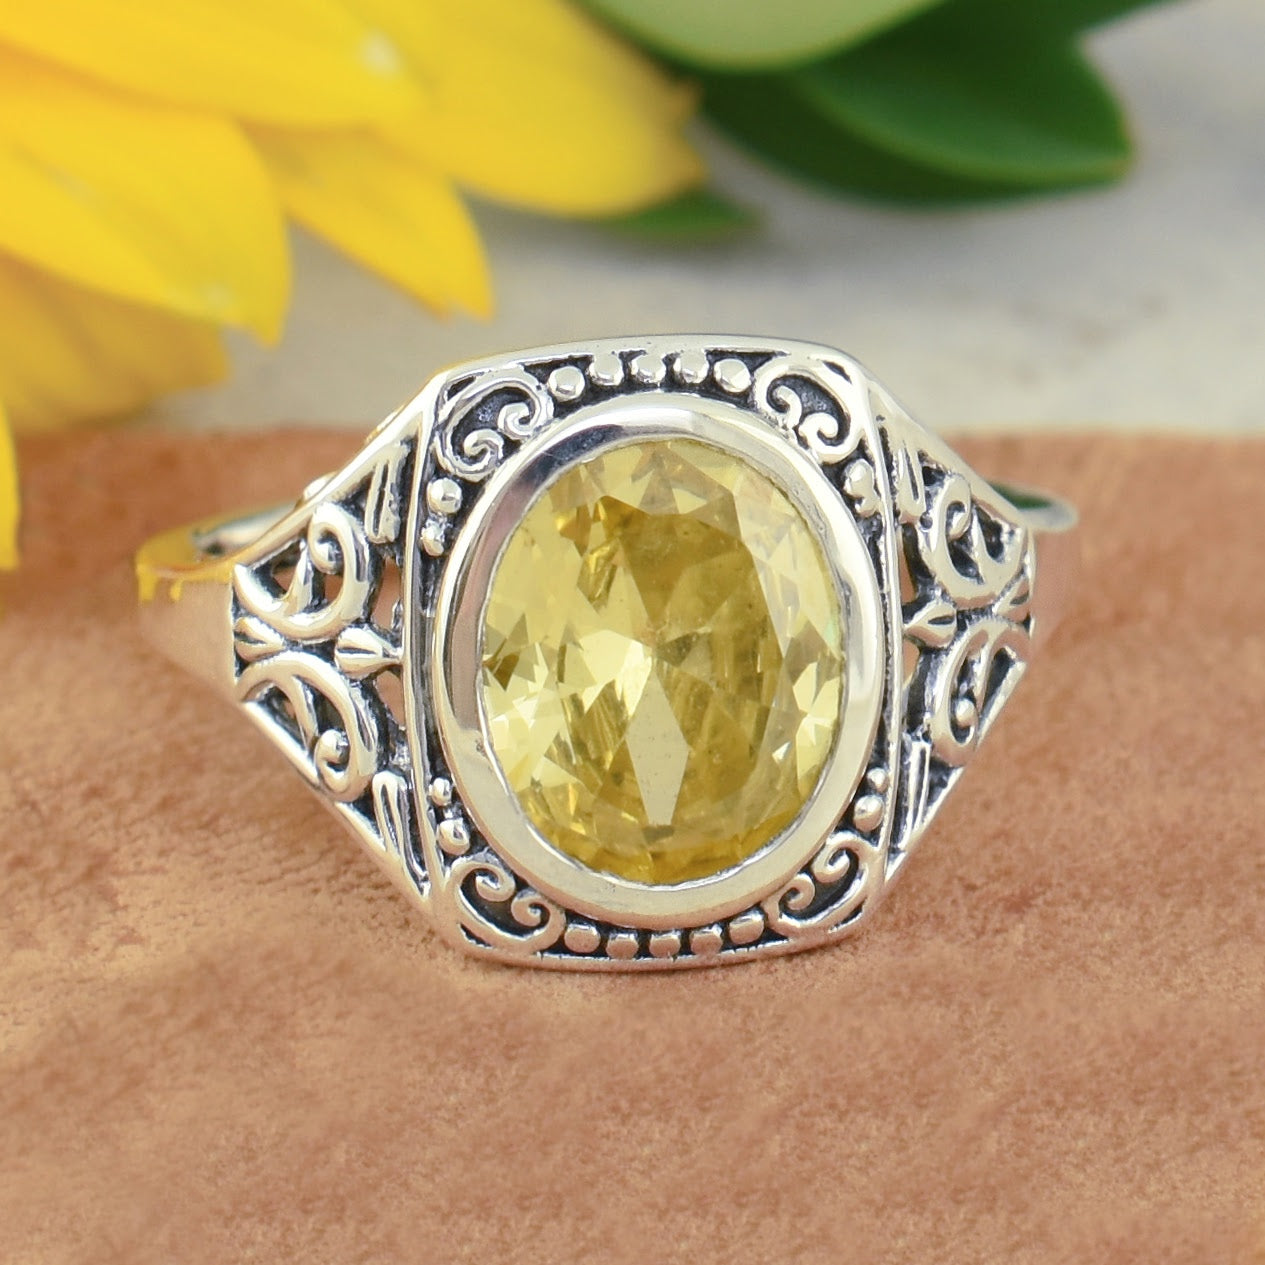 .925 sterling silver ring with canary yellow cz